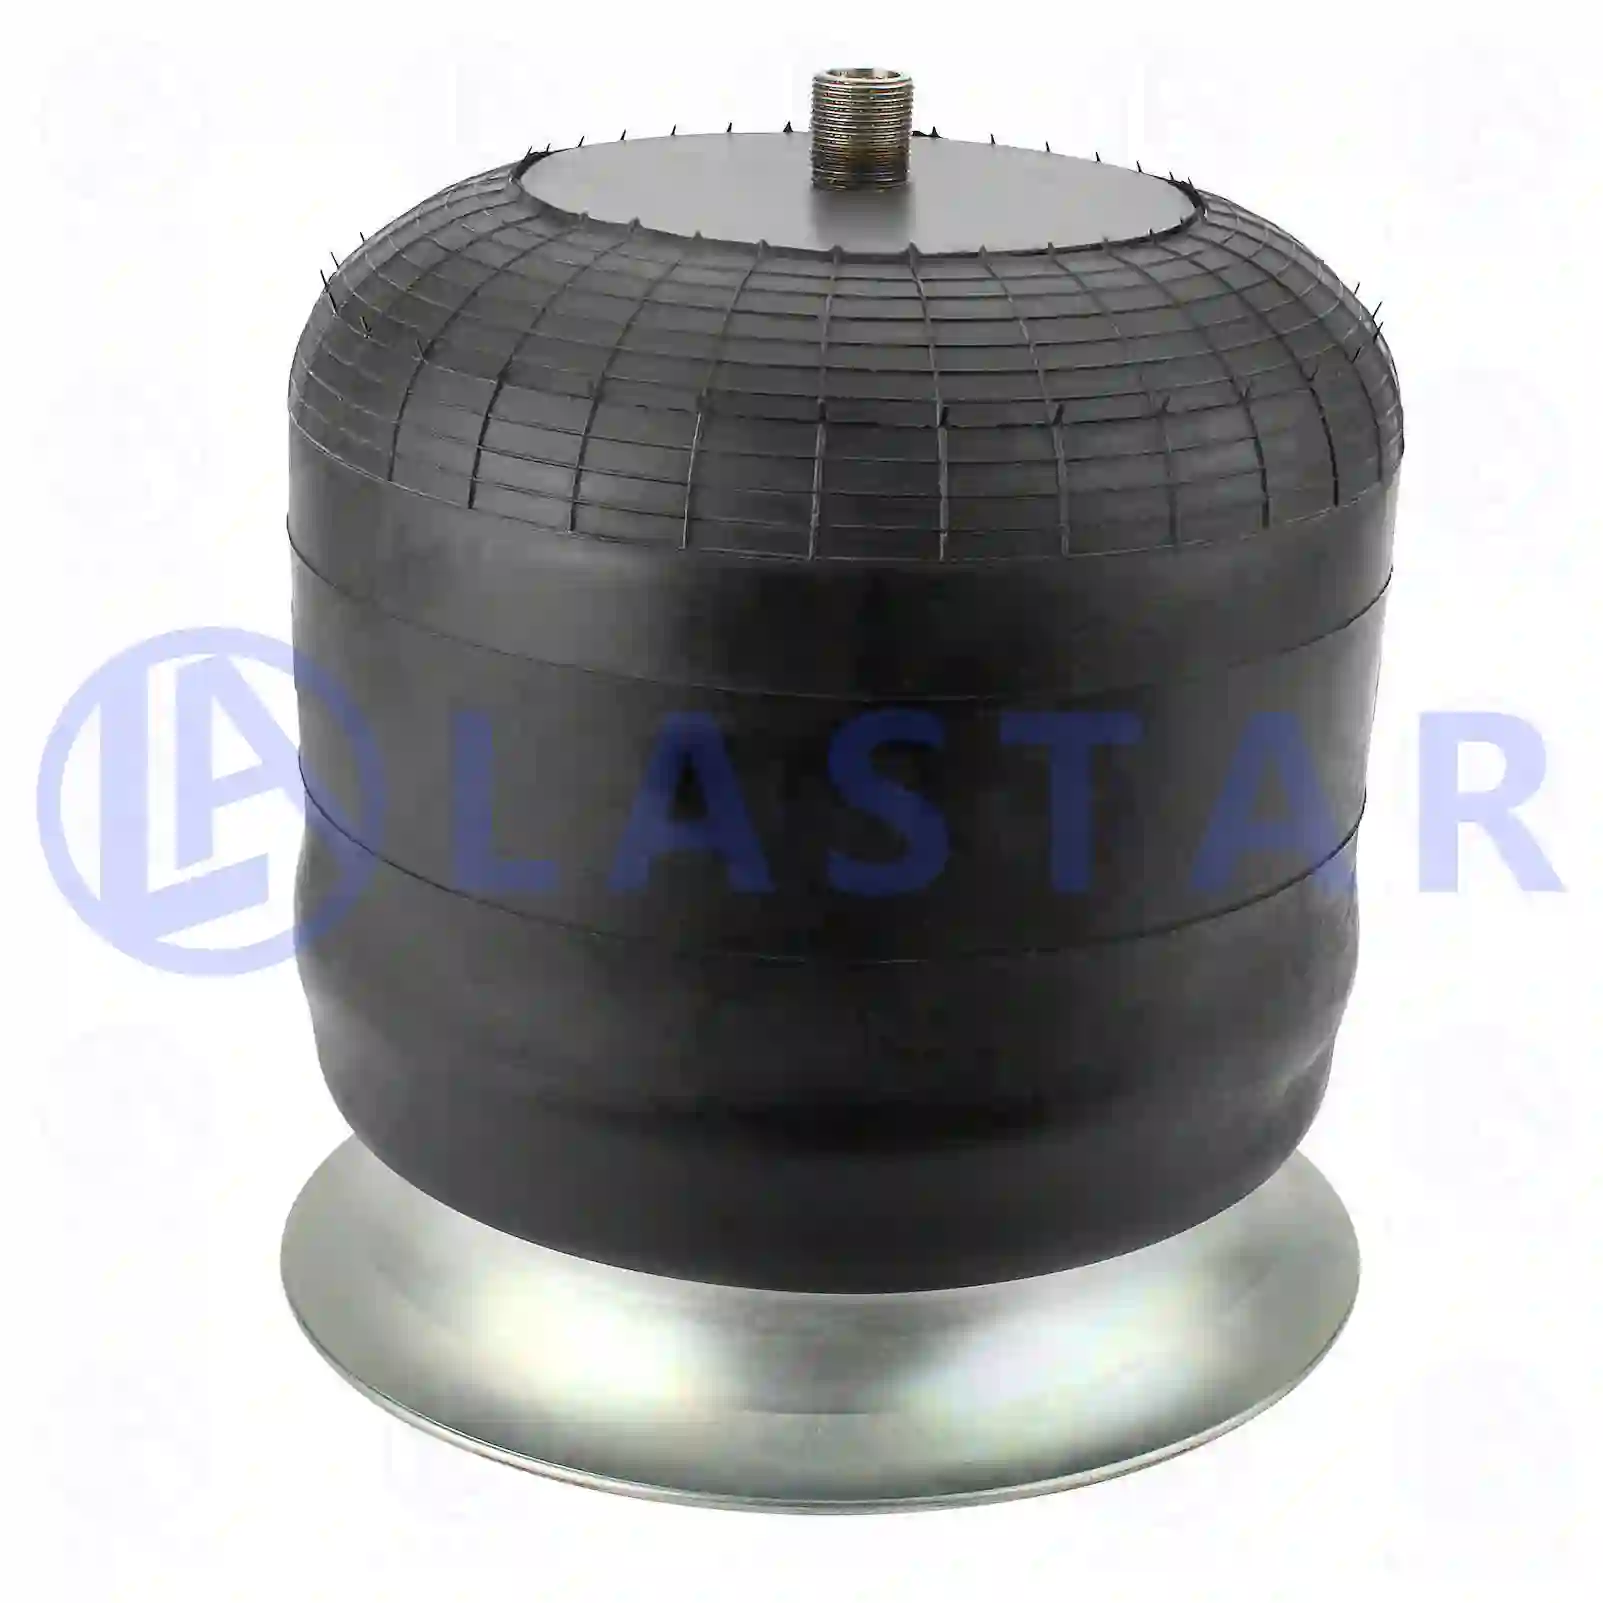 Air spring, with steel piston, 77727170, 9423200217, 9423204421, , ||  77727170 Lastar Spare Part | Truck Spare Parts, Auotomotive Spare Parts Air spring, with steel piston, 77727170, 9423200217, 9423204421, , ||  77727170 Lastar Spare Part | Truck Spare Parts, Auotomotive Spare Parts